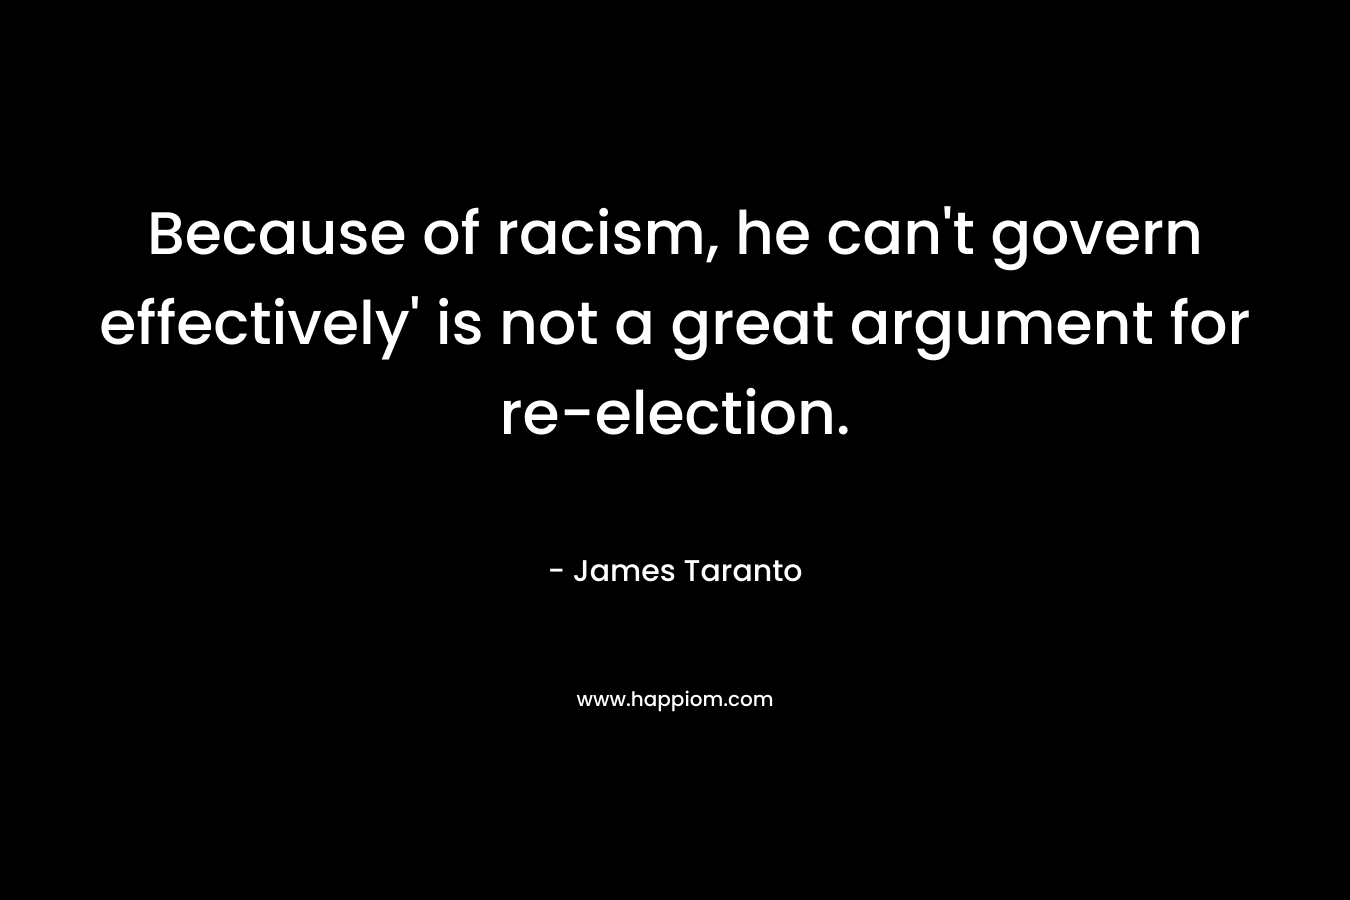 Because of racism, he can't govern effectively' is not a great argument for re-election.